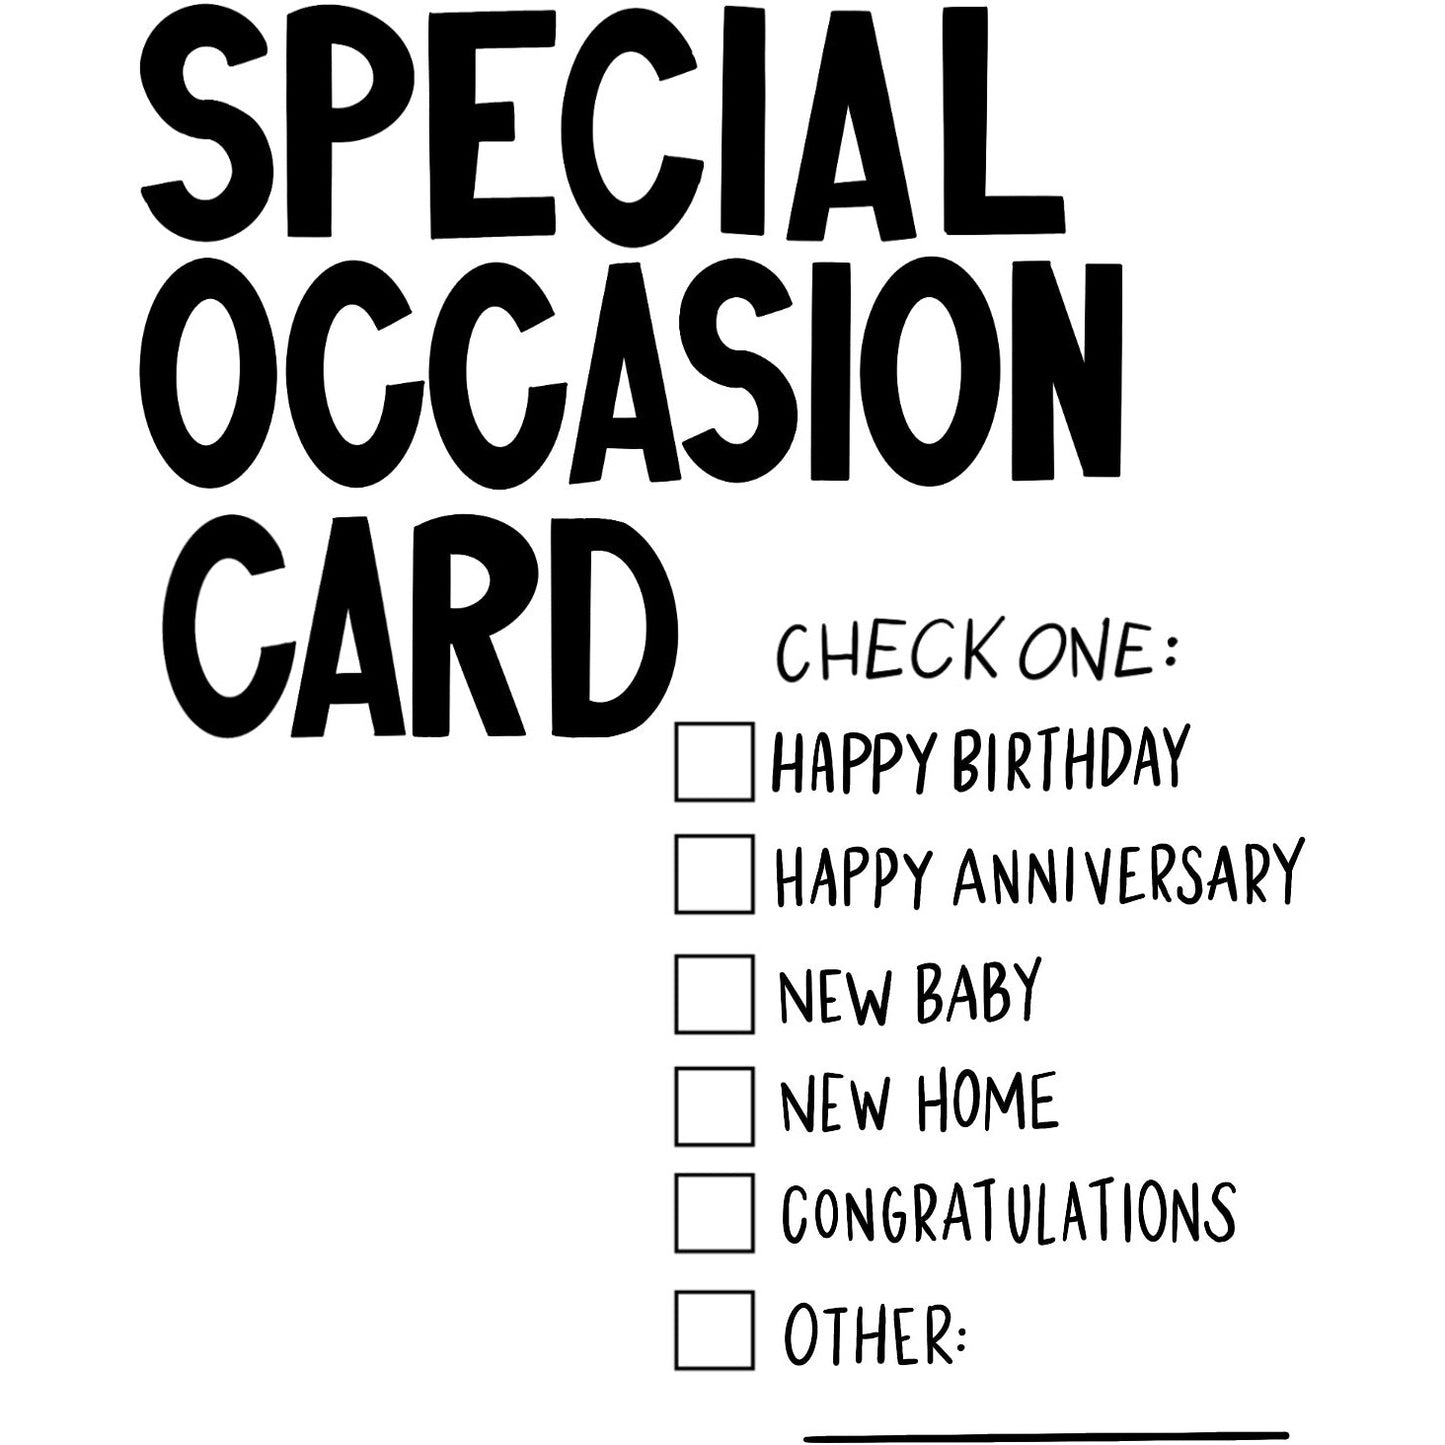 Special Occasion Card (check the box to indicate WHICH special occasion) - Greet